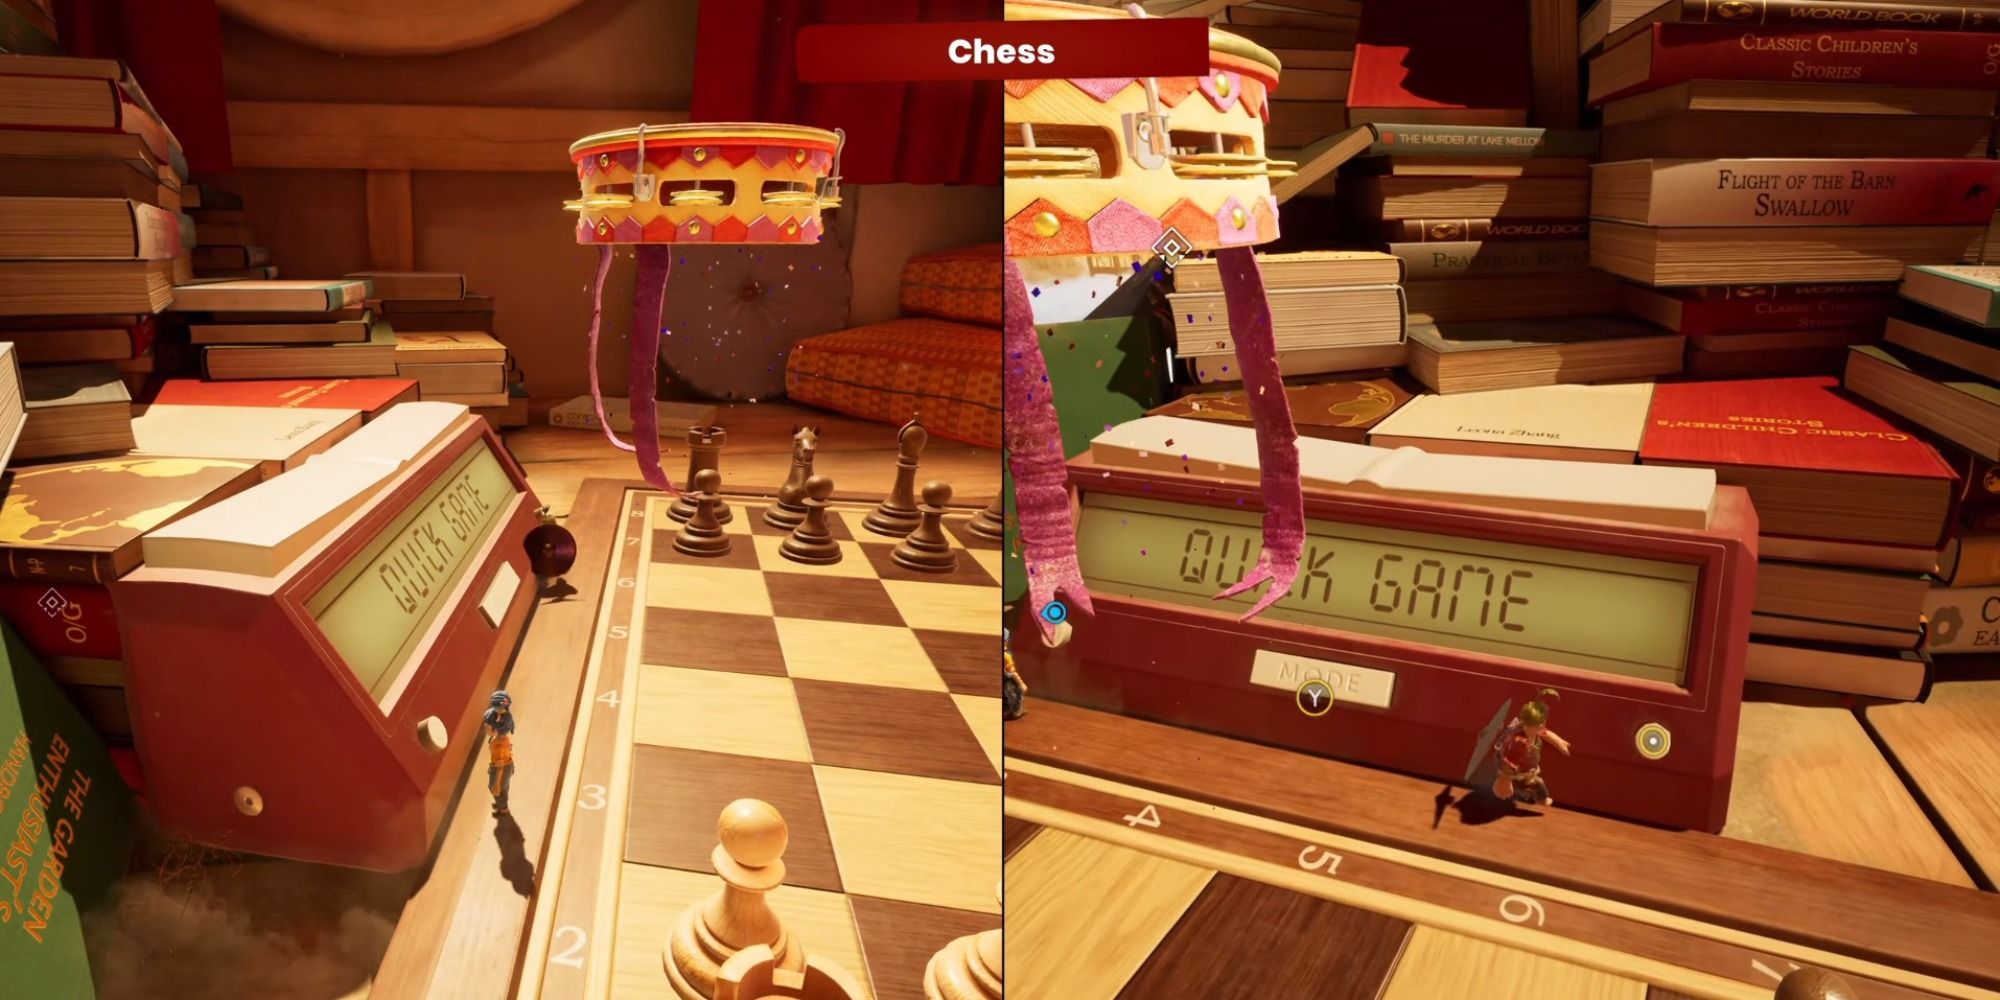 It Takes Two Chess minigame with timer and books in the background